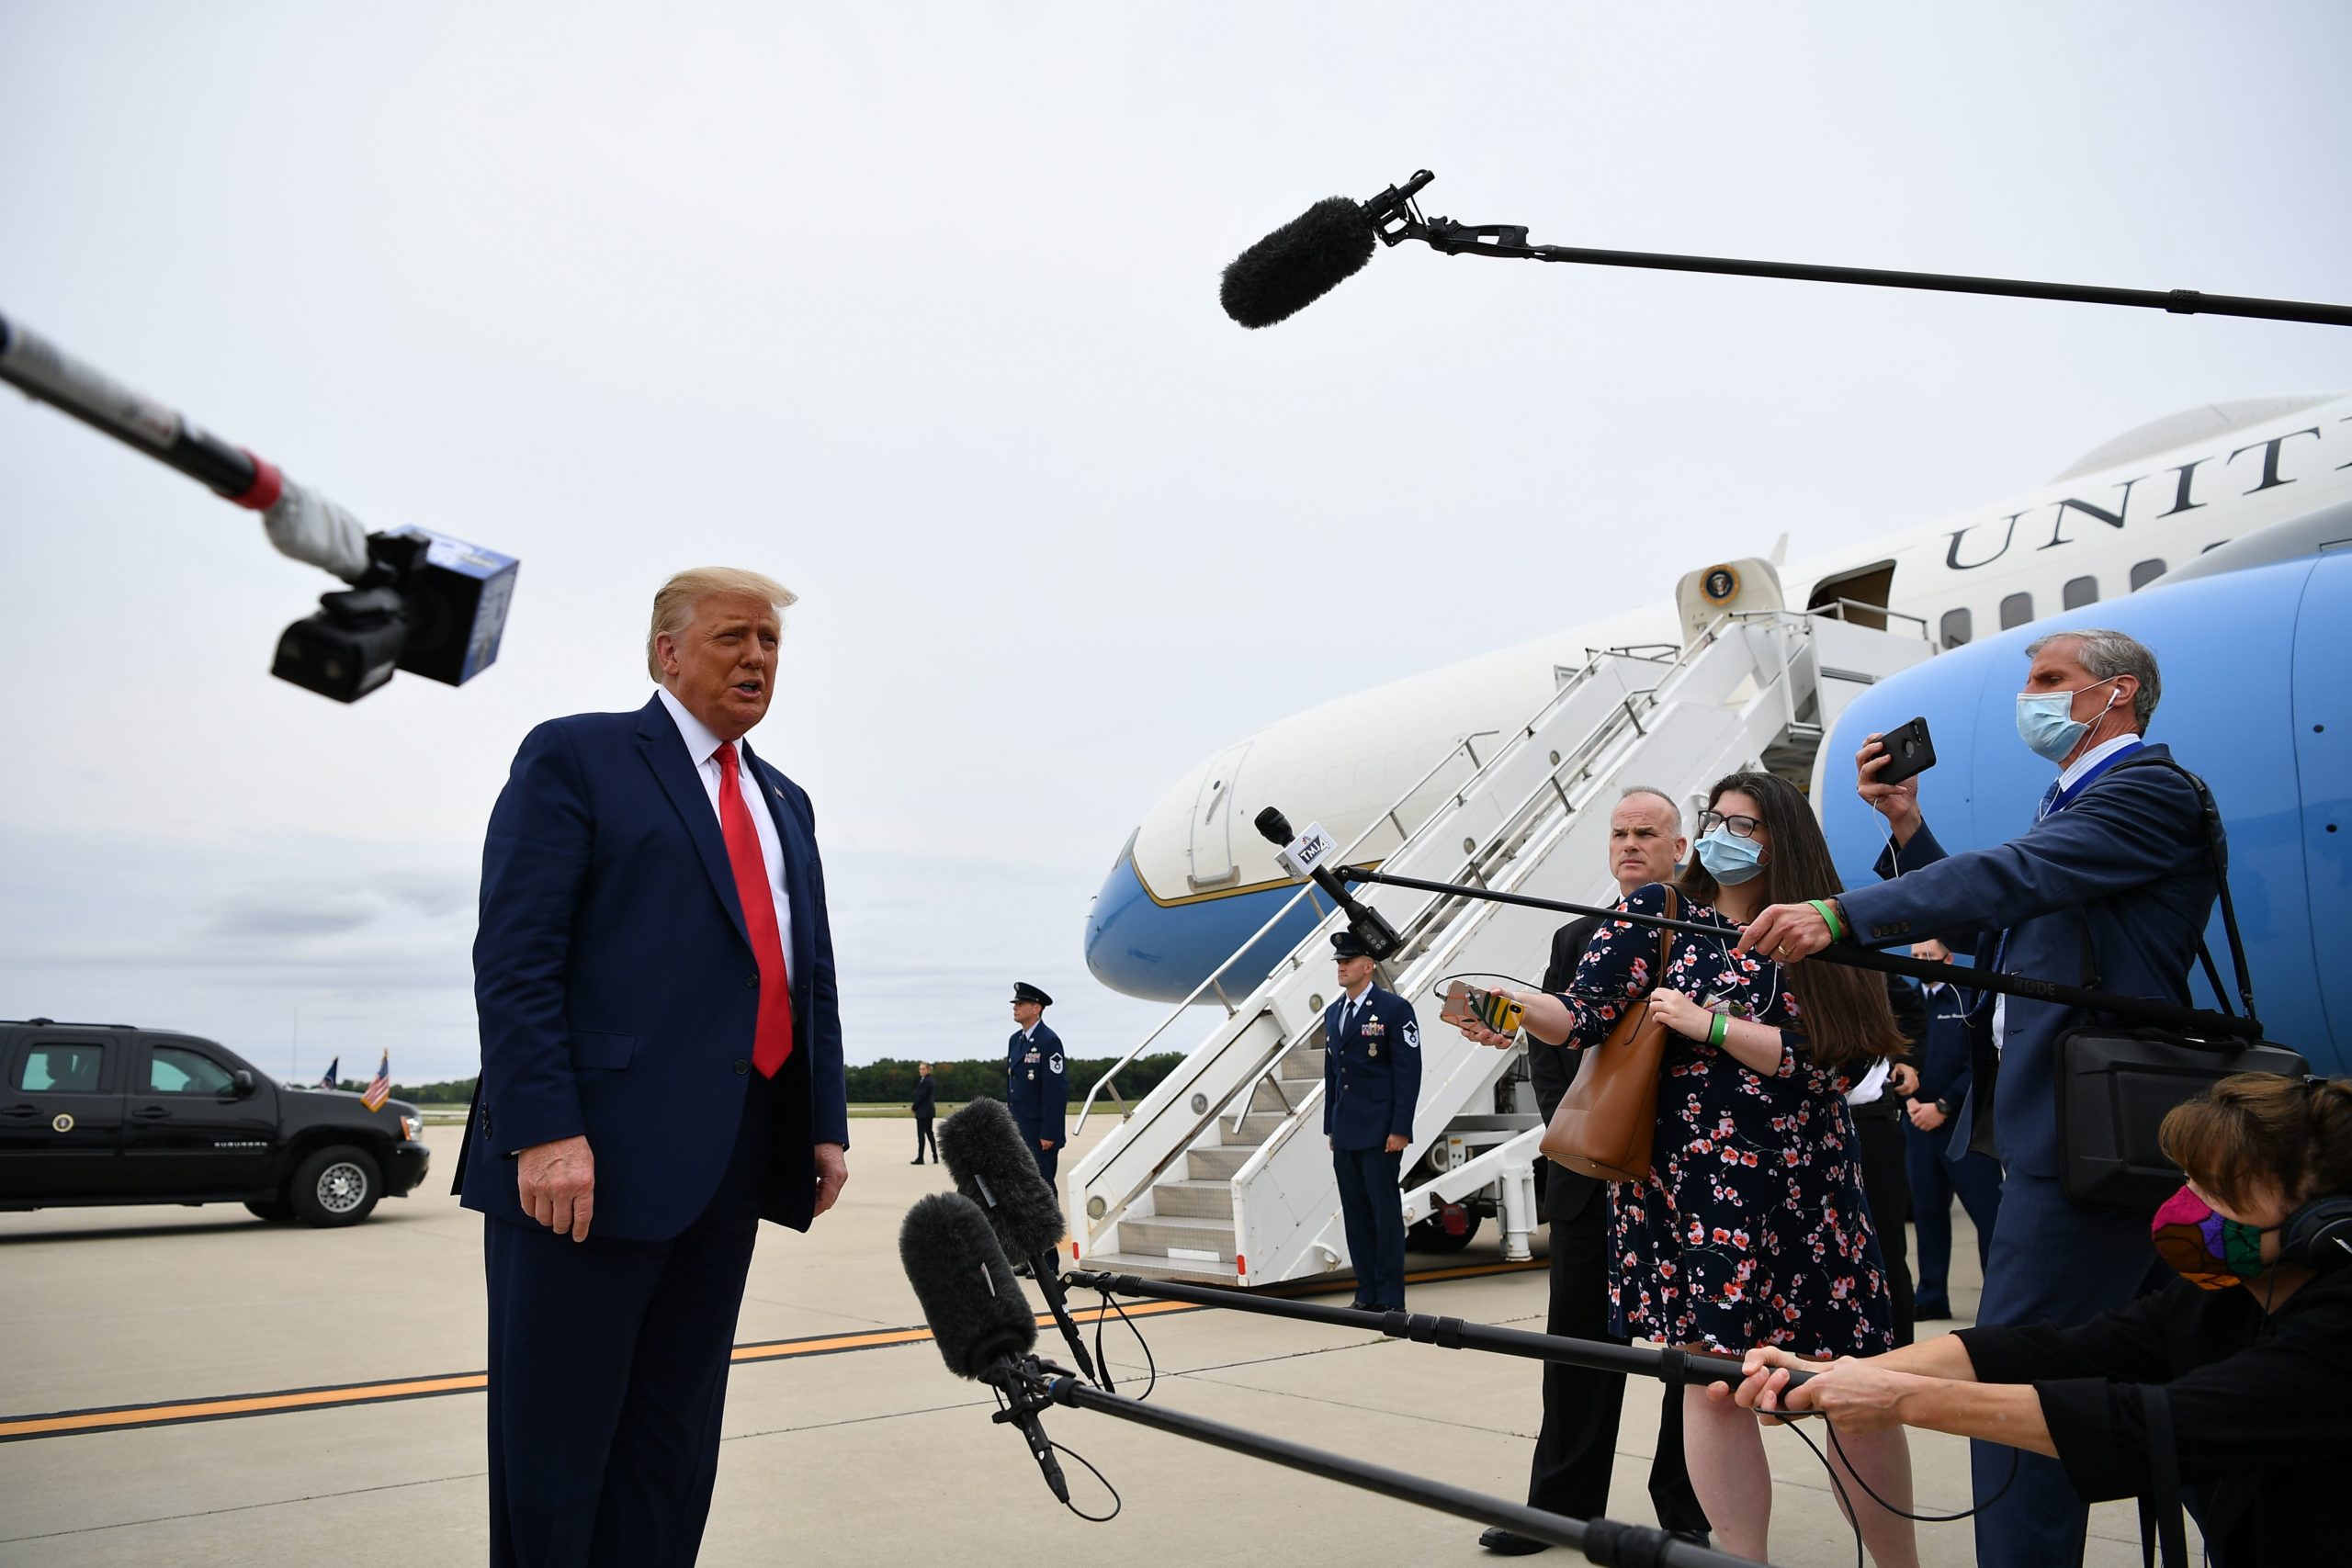 US President Donald Trump speaks to the media as he makes his way to board Air Force One before departing from Andrews Air Force Base in Maryland on September 1, 2020, heading to Kenosha, Wisconsin to meet with law enforcement officials and to survey damage following civil unrest in the city. (Photo by MANDEL NGAN / AFP) (Photo by MANDEL NGAN/AFP via Getty Images)